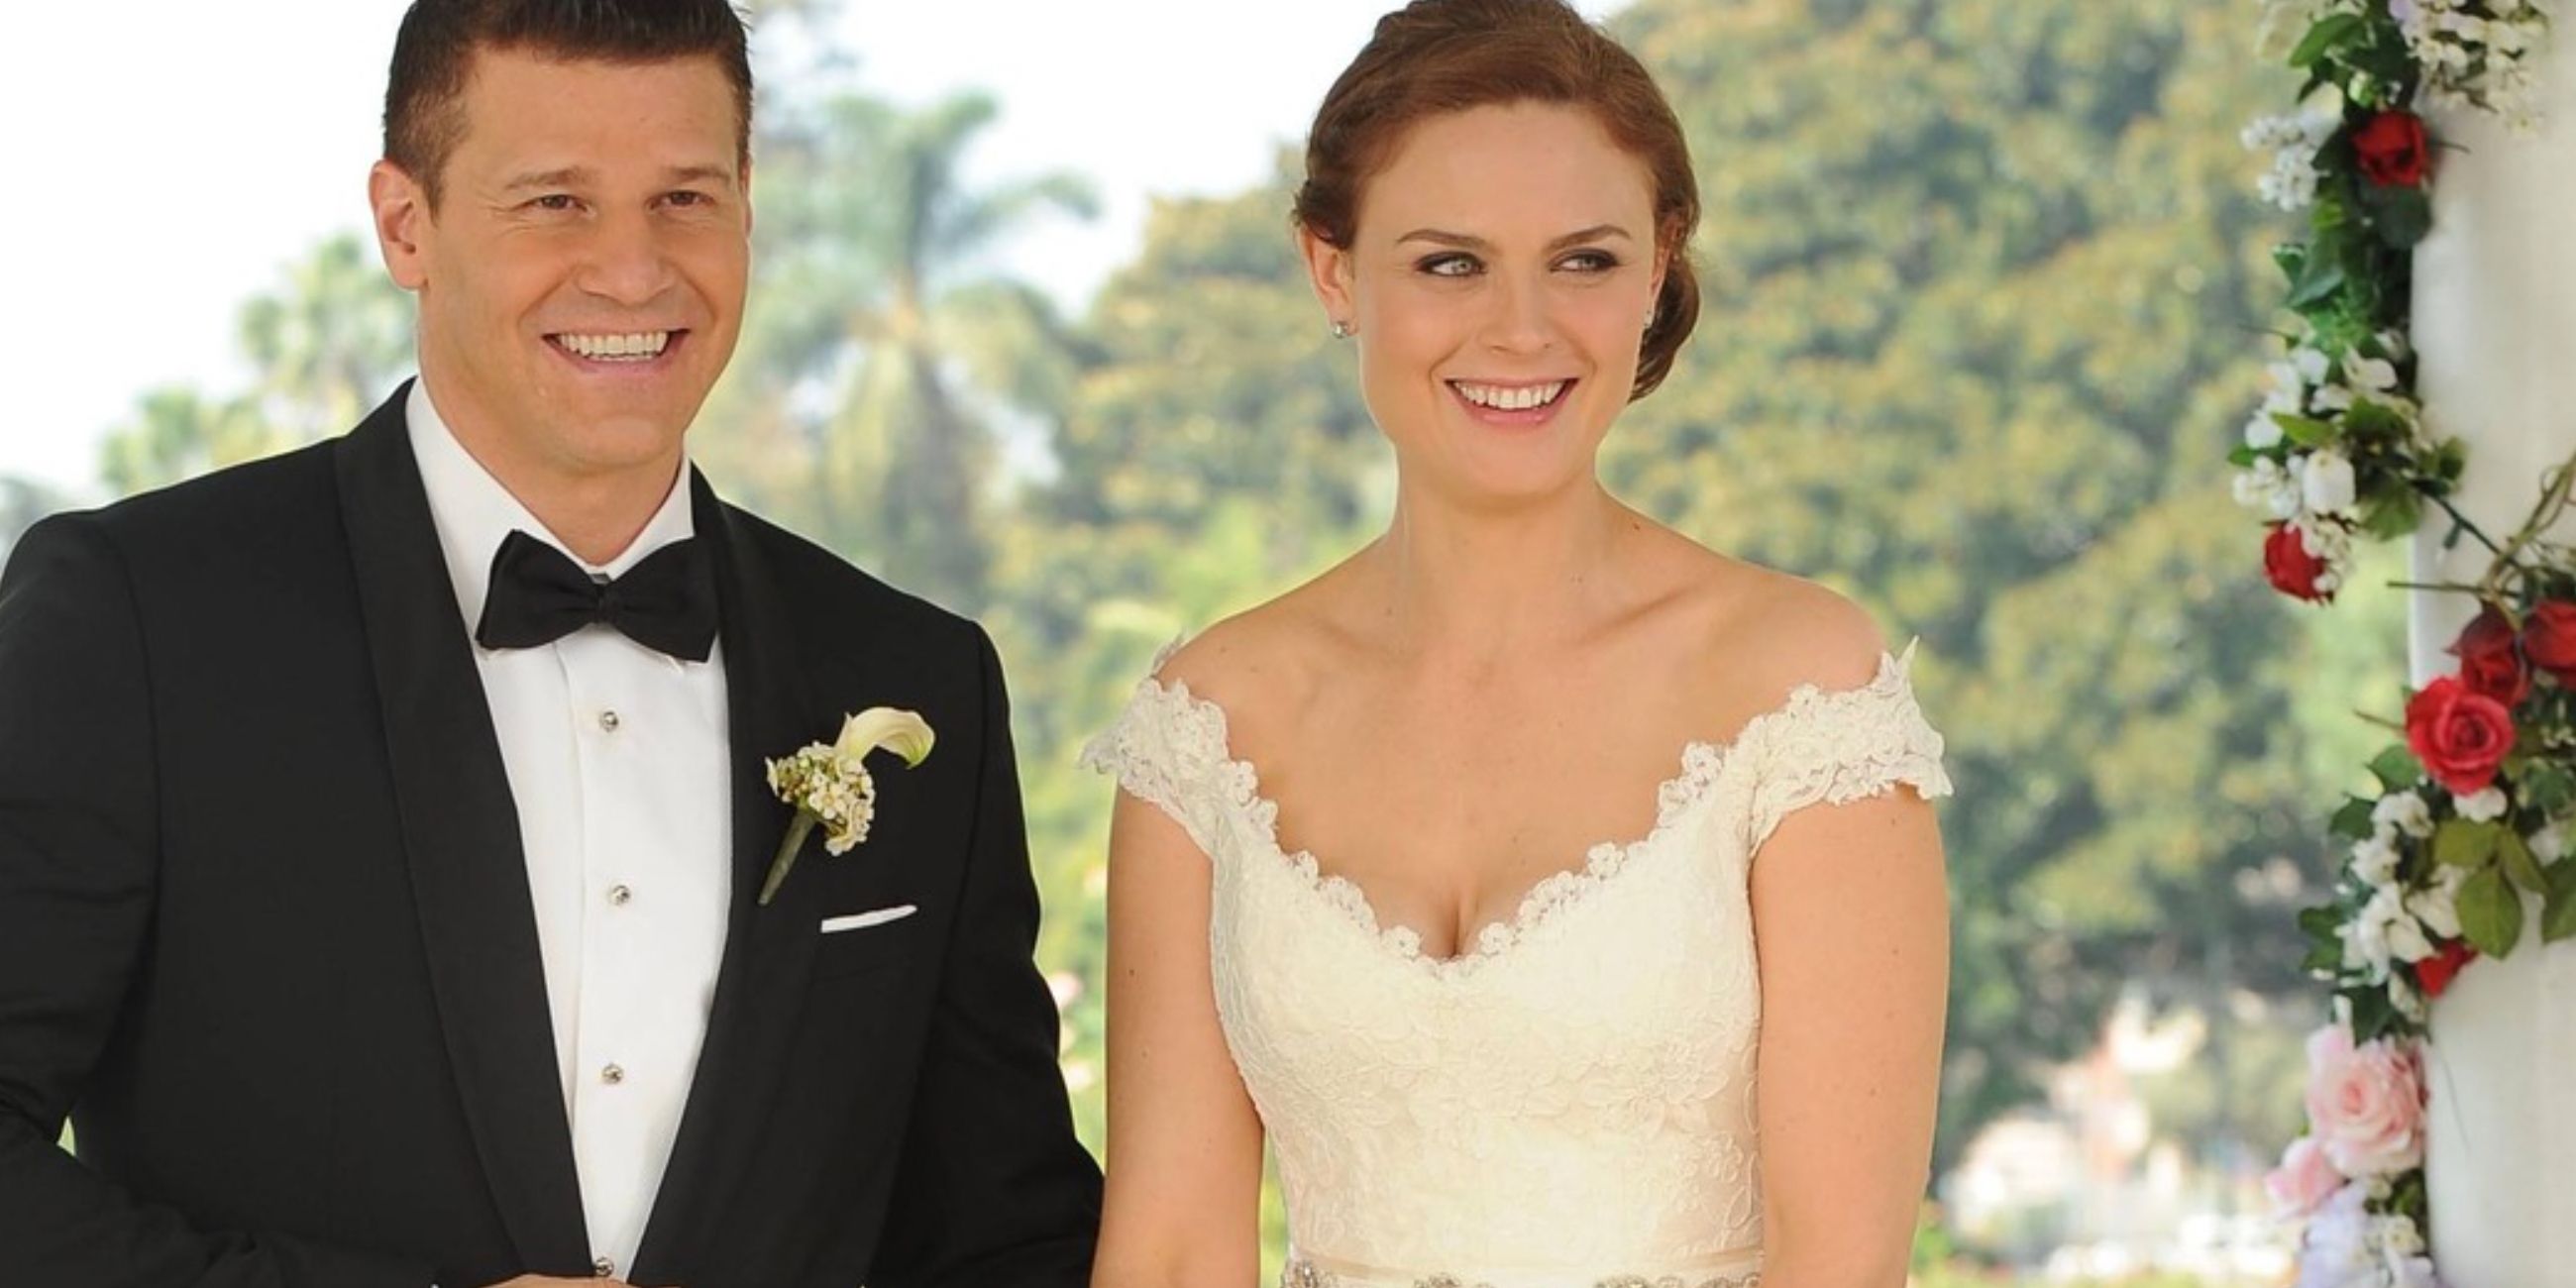 Booth and Brennan smiling on their wedding day in Bones